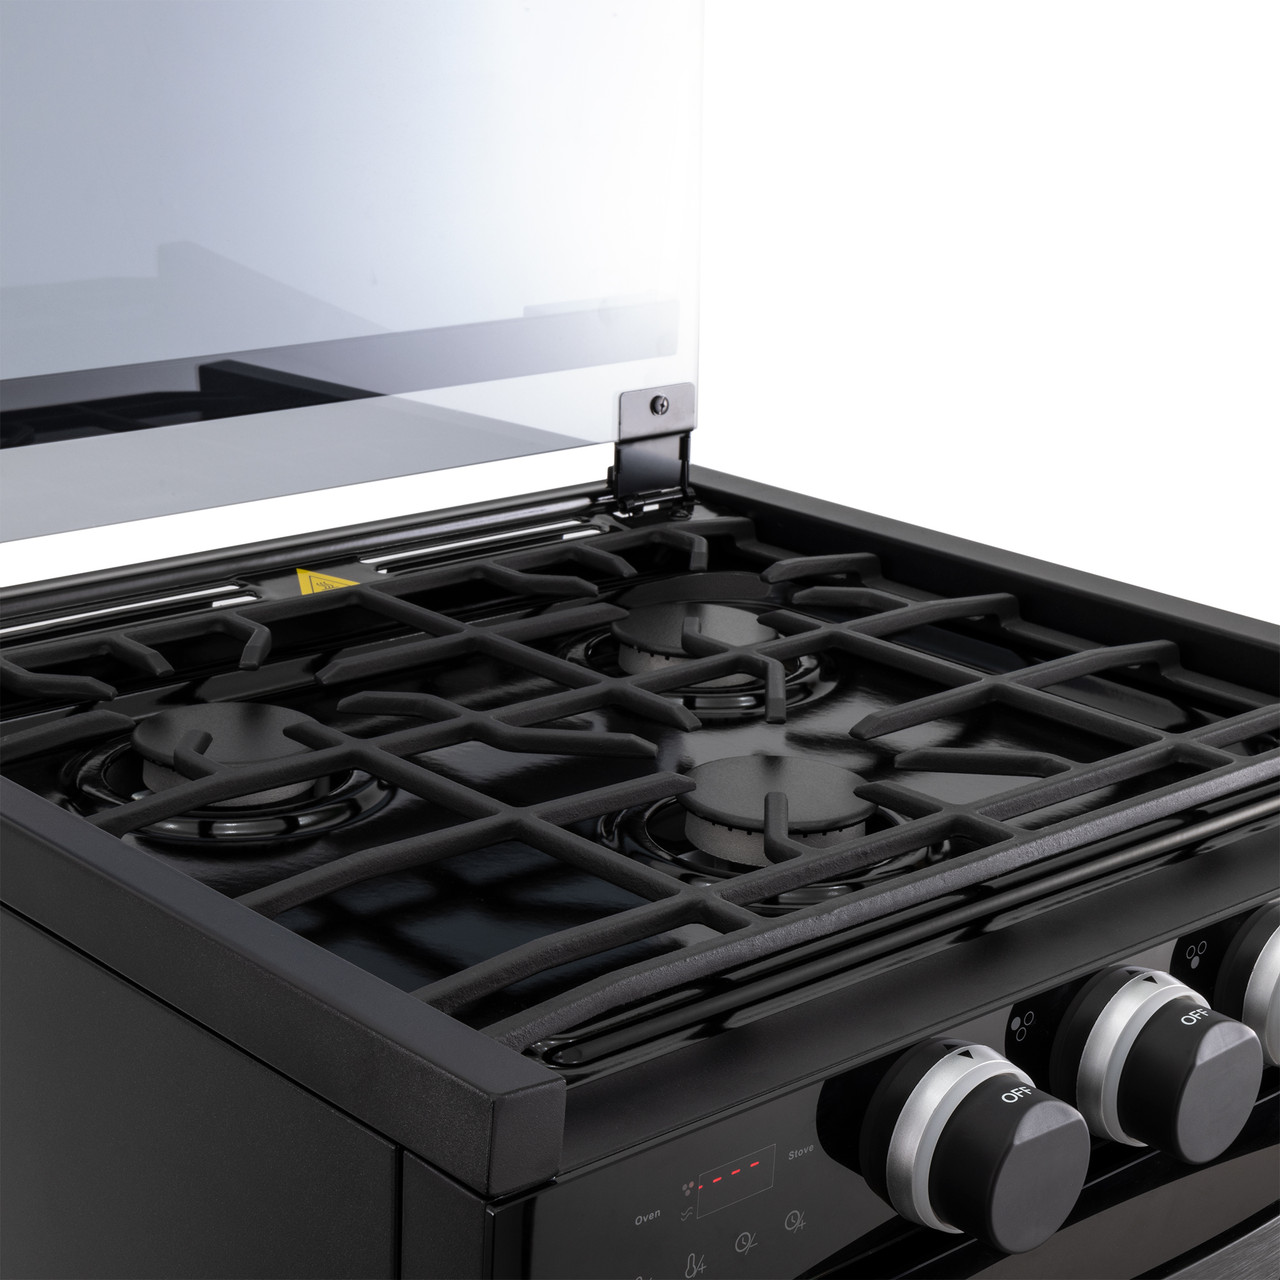 Whirlpool 21 in. 2-Burner Electric Cooktop with Power Burner